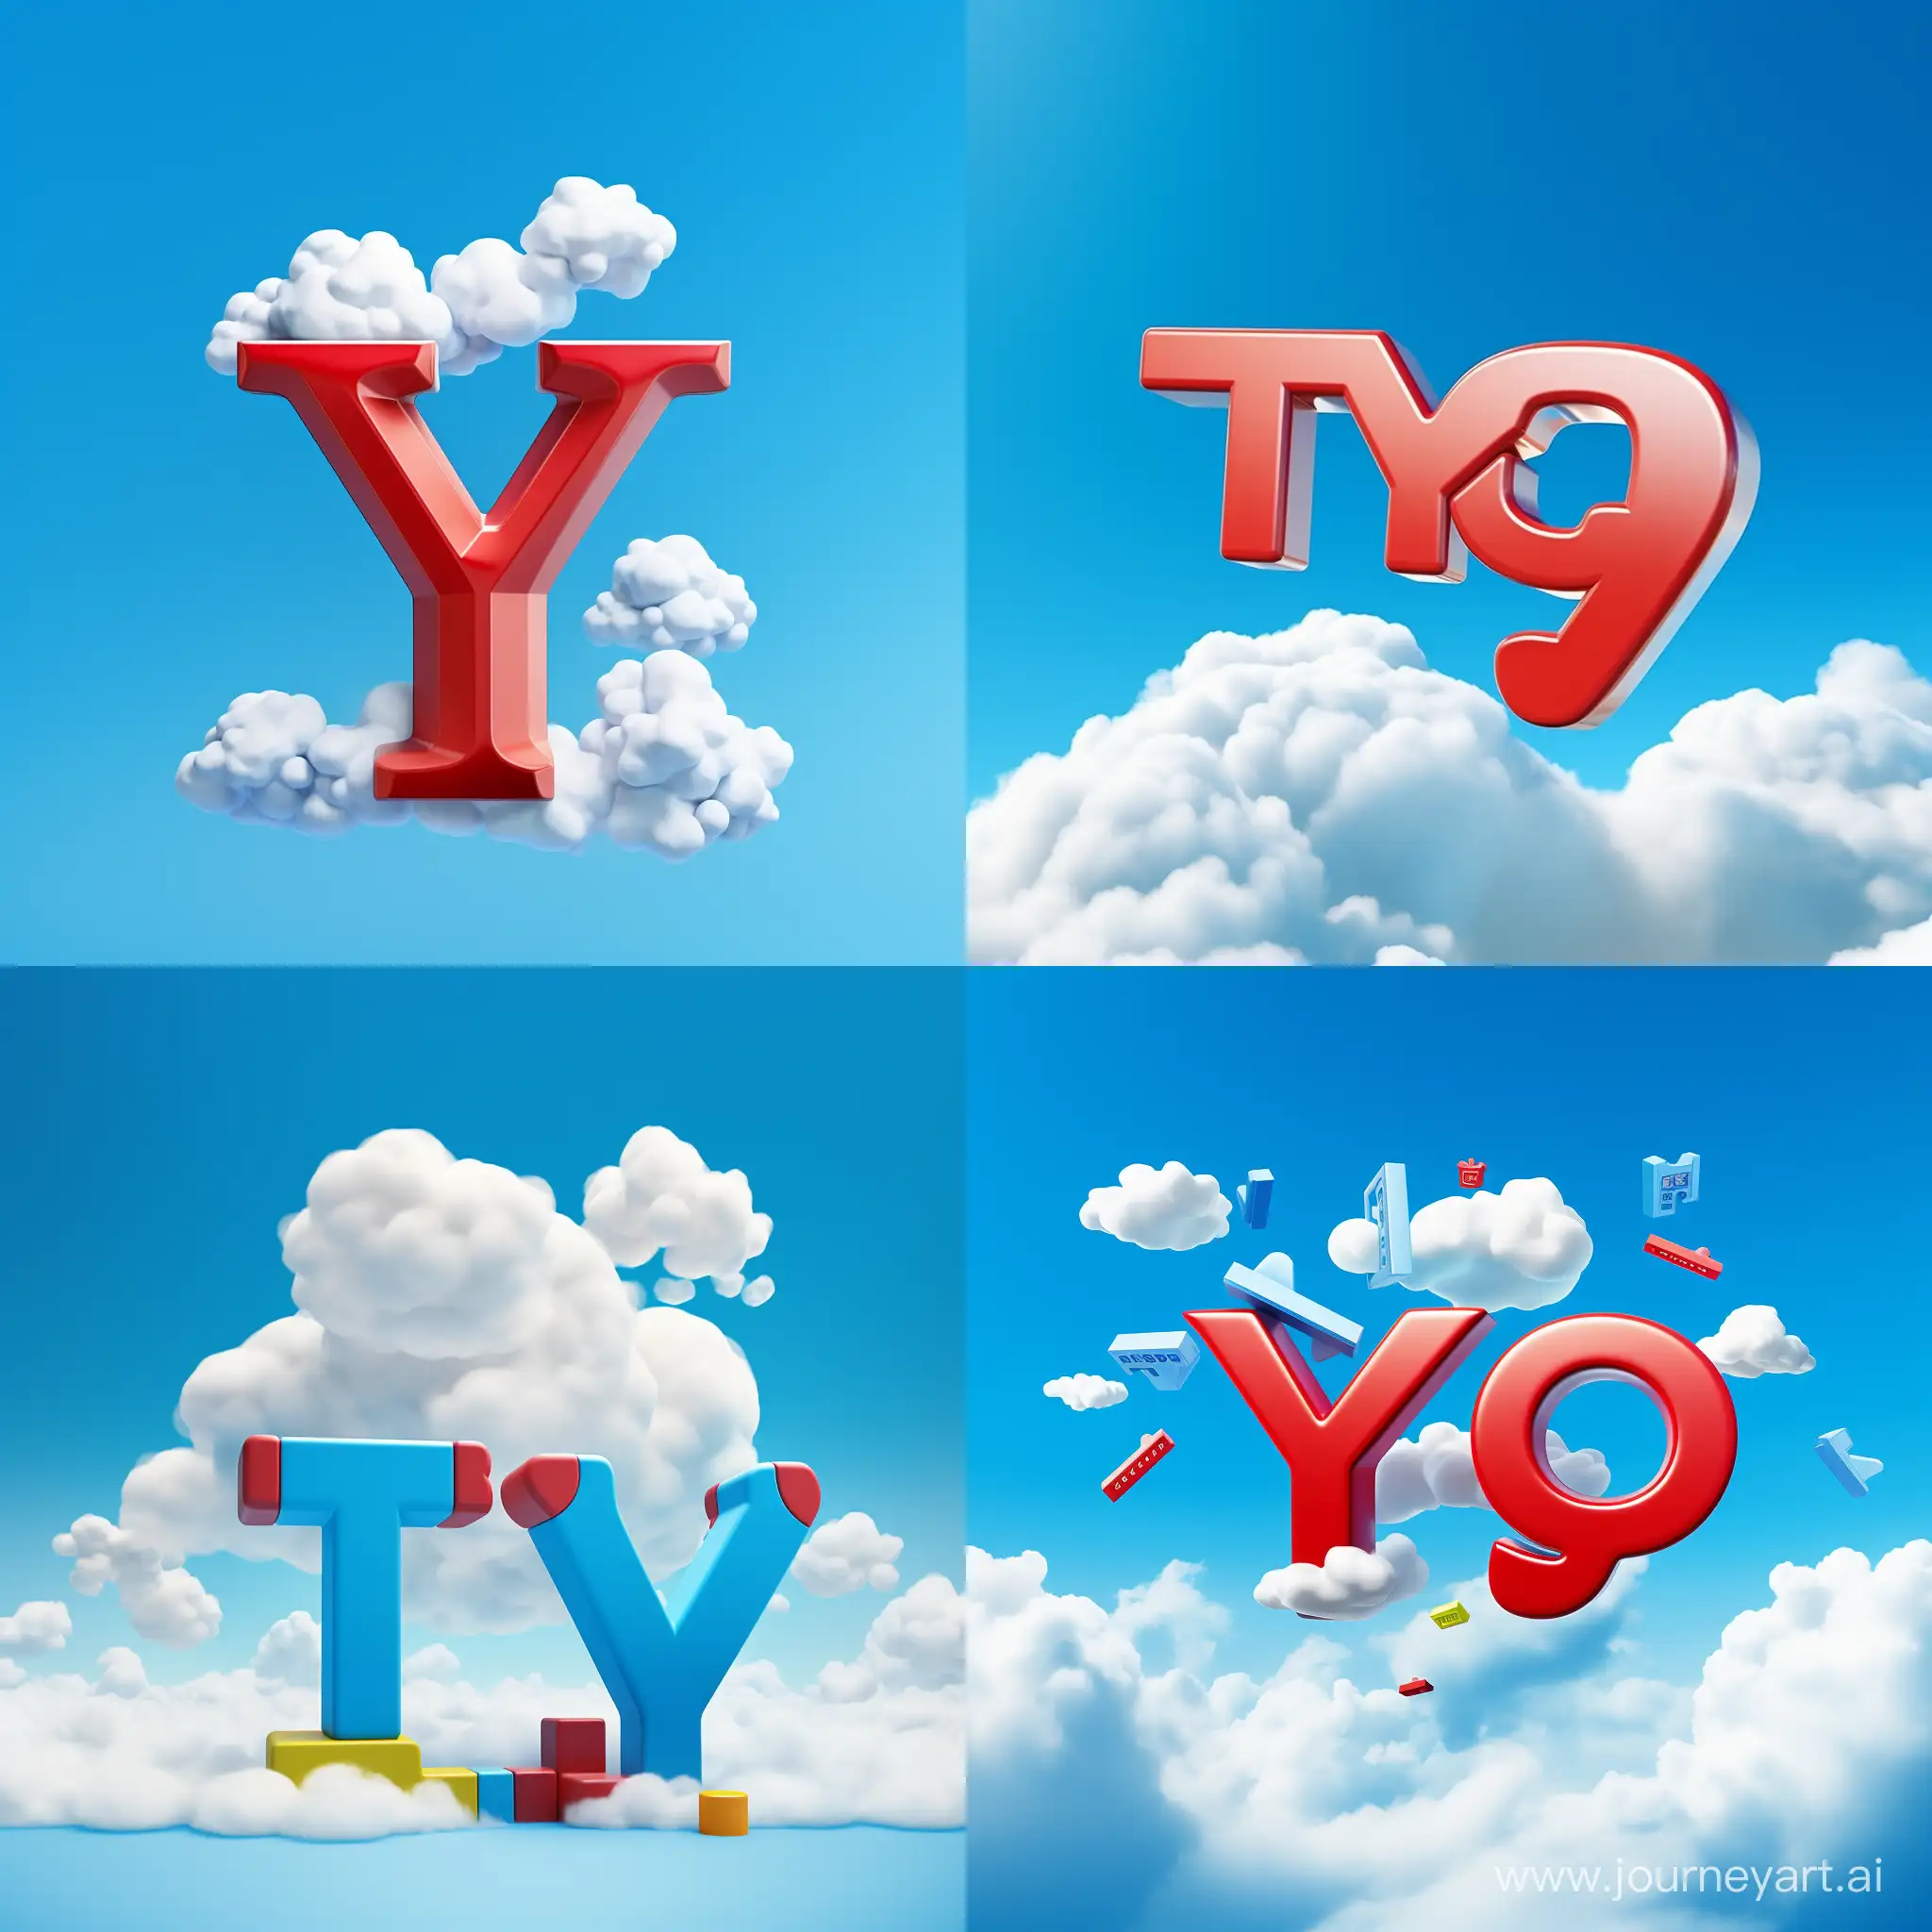 A 4K ultra realistic logo for a business called TOYAGO. Each letter of the name is made of a different LEGO character, with their own color and personality. The characters are arranged in a way that they form the word TOYAGO, while also interacting with each other. The background is a bright blue sky with some clouds. The logo has a playful and cheerful vibe.  Parameters:  - resolution: 3840 x 2160 - style: realistic - quality: high - diversity: low - coherence: high - seed: 42